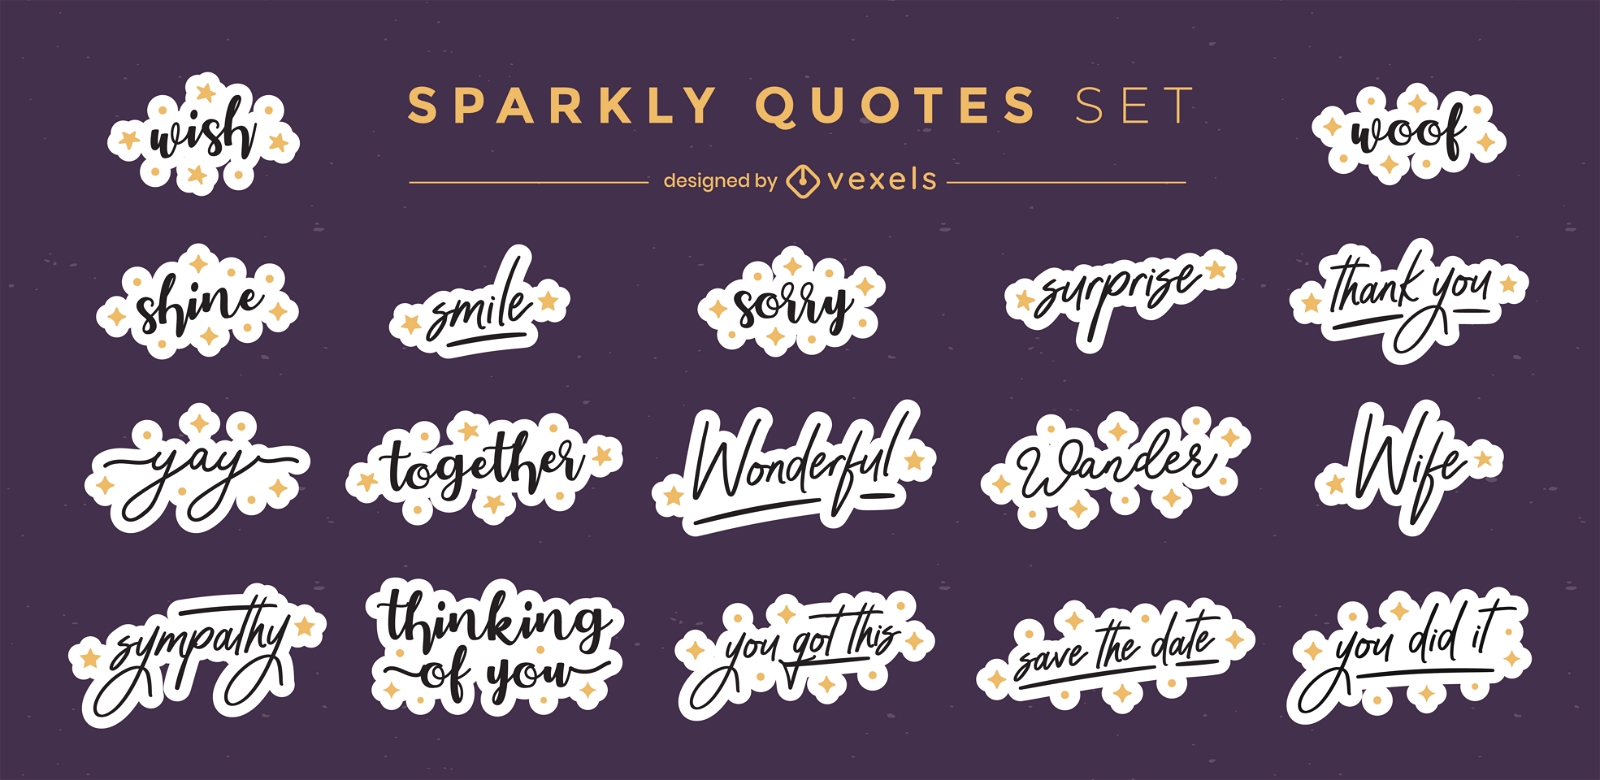 Great sparkly quotes set